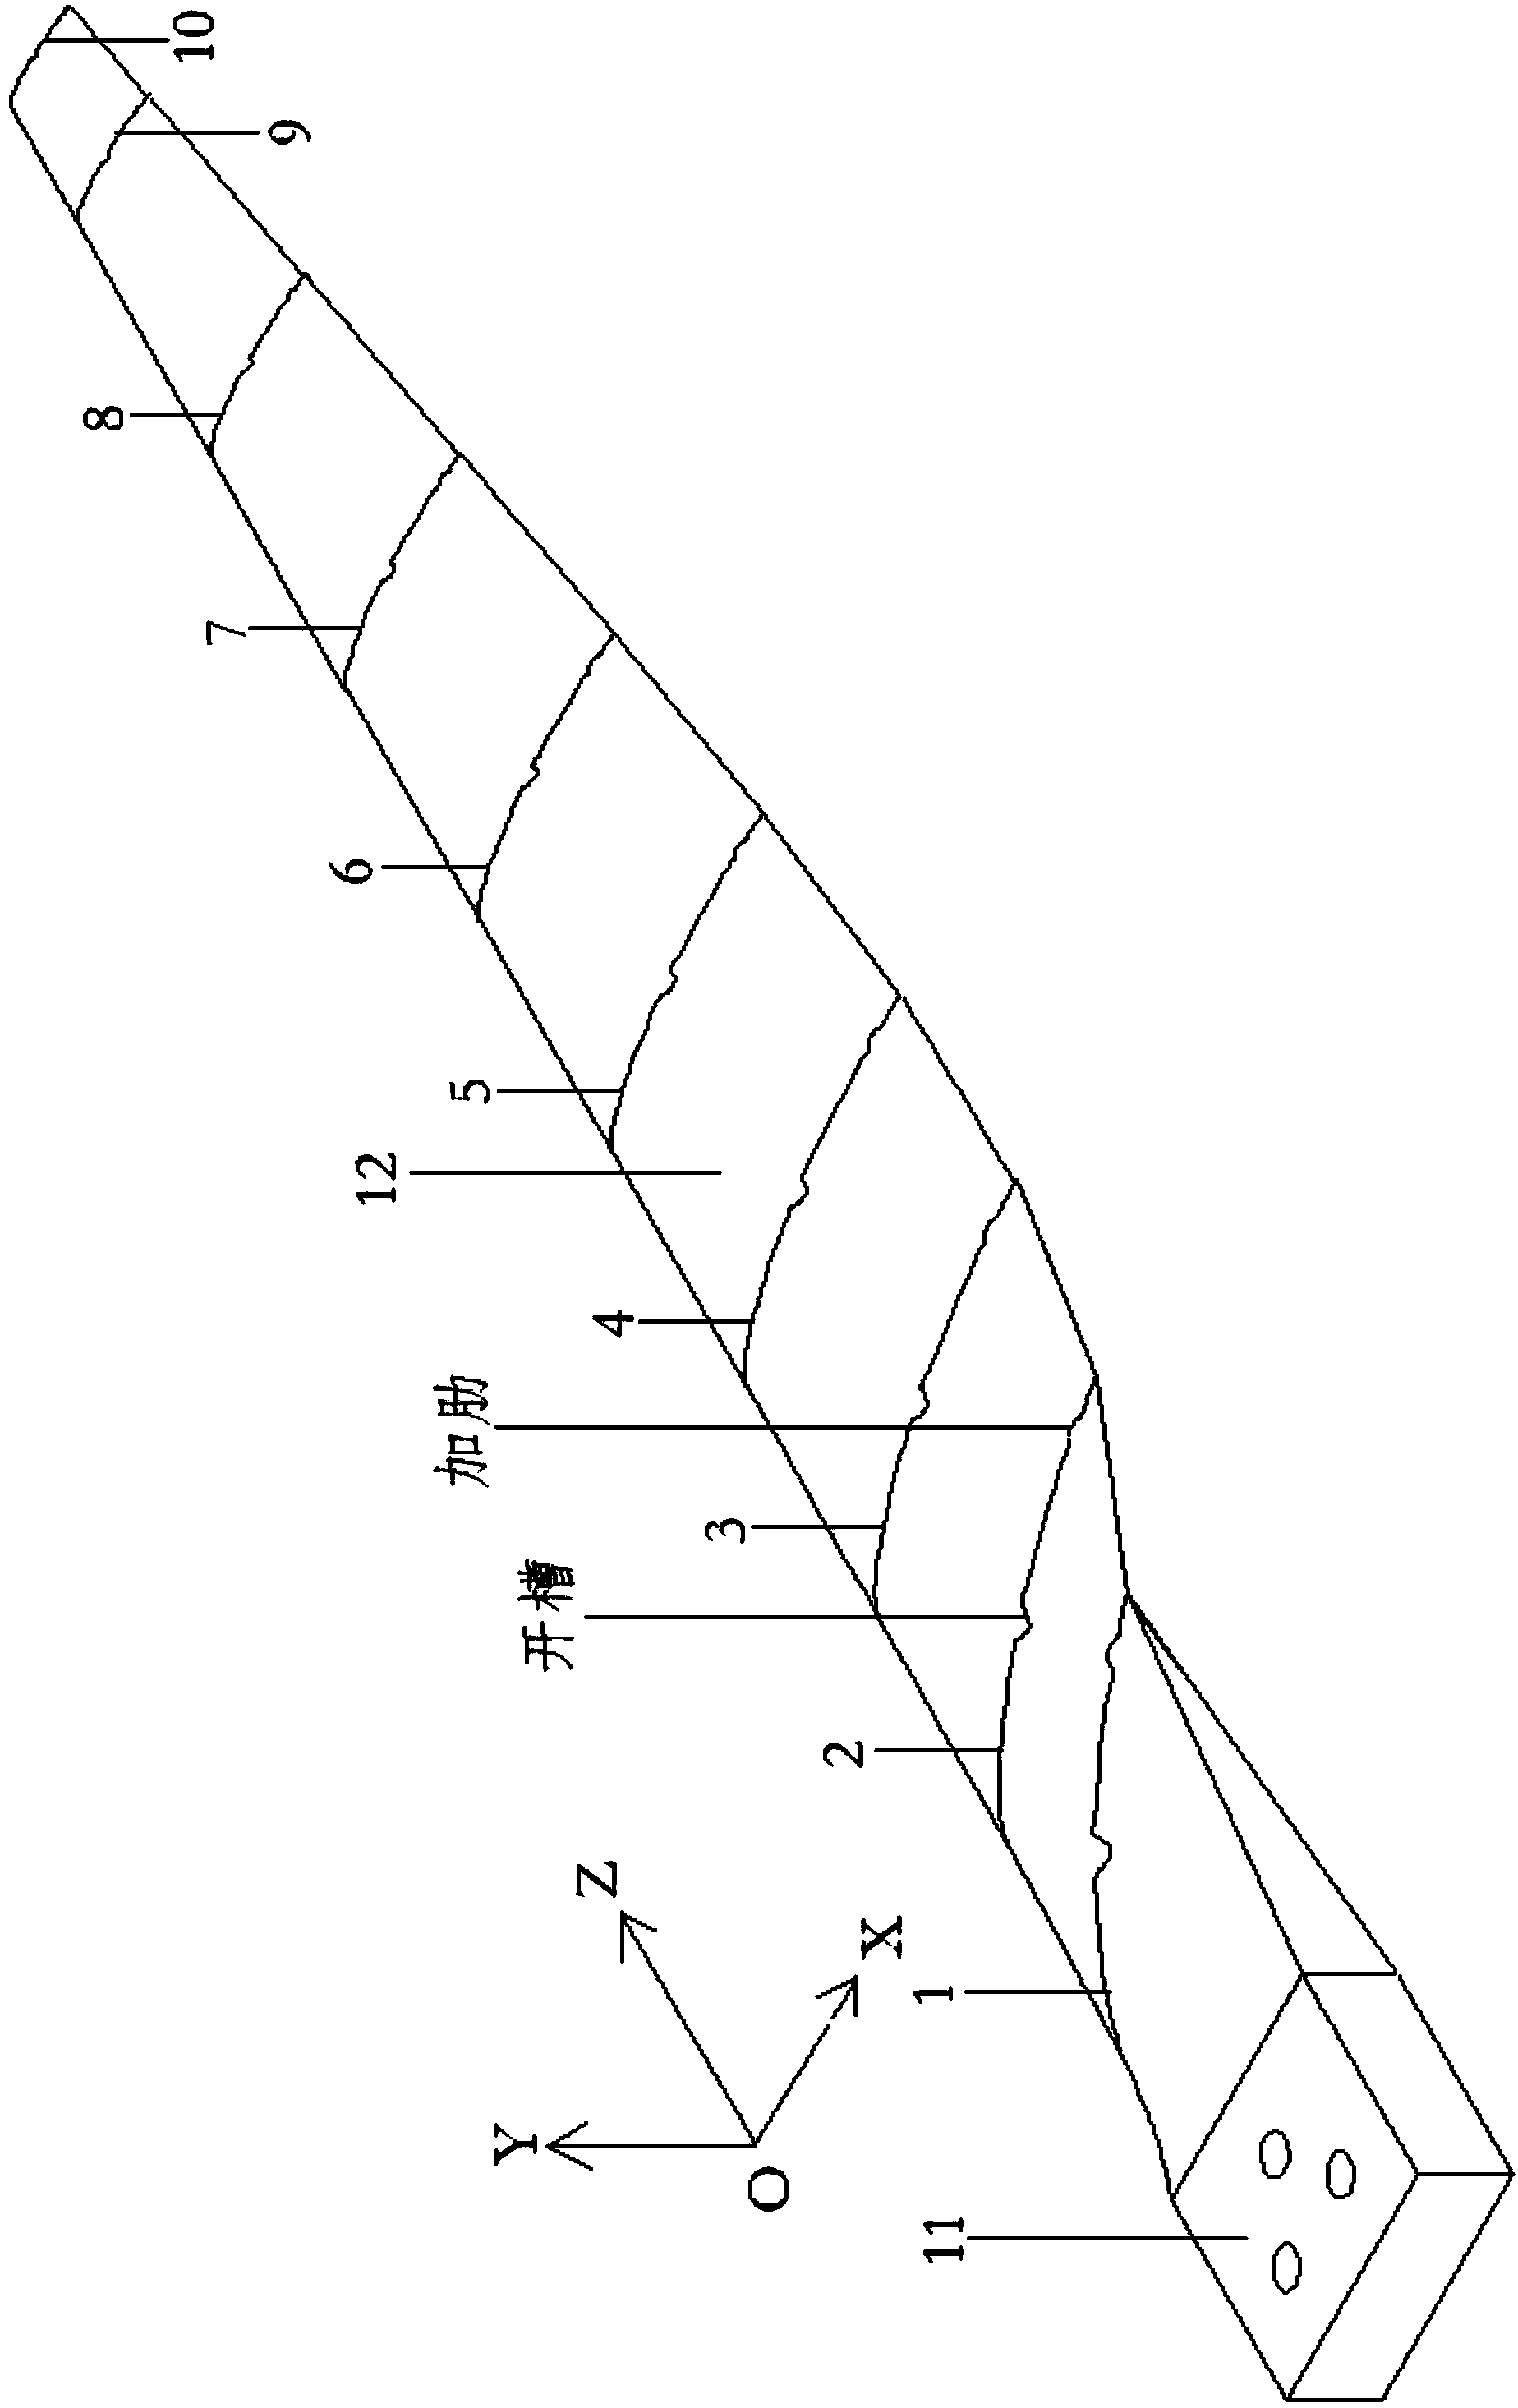 Ribbed and grooved type wind turbine blade